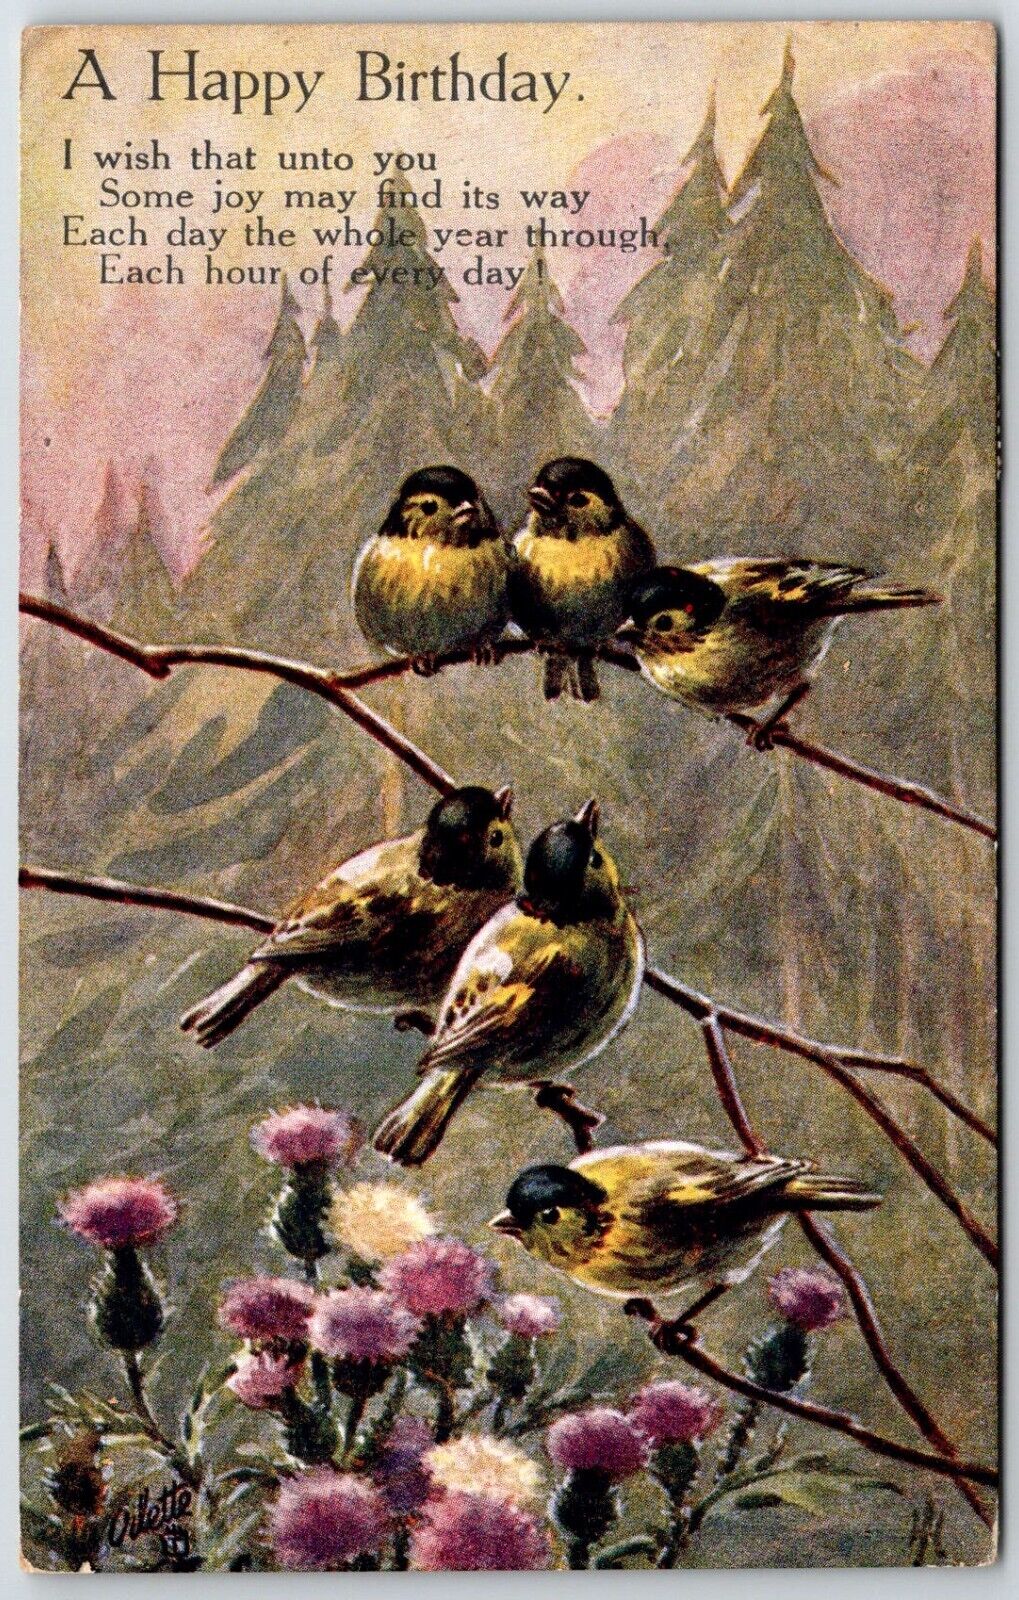 tucks A HAPPY BIRTHDAY six finches above thistles 1753